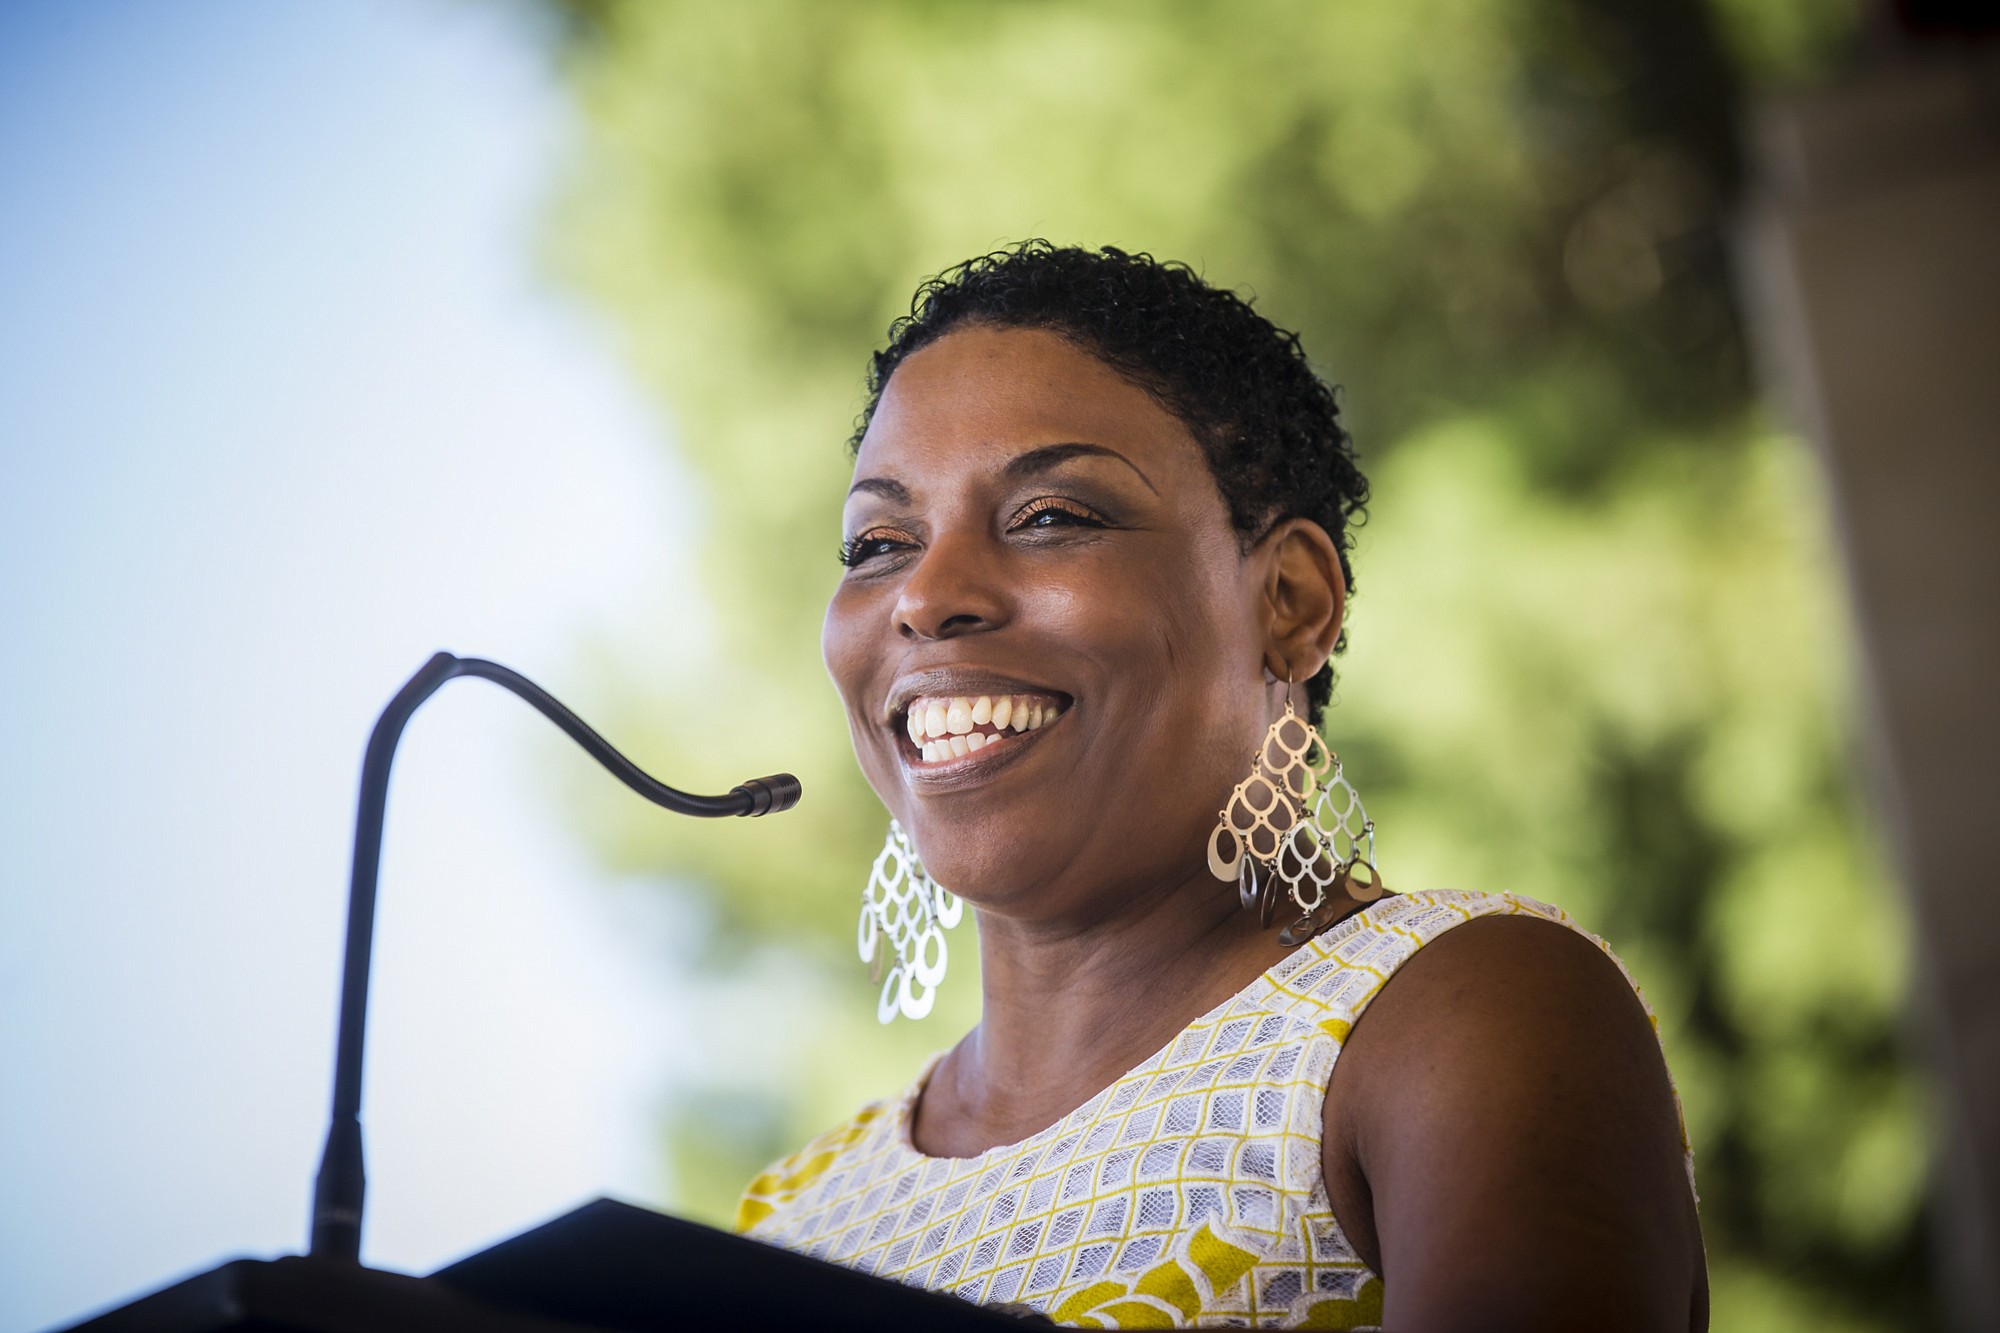 Professor Debra Jenkins, tenured faculty at Clark College, spoke about racial tension at Saturday's Juneteenth event at Marshall Community Park.